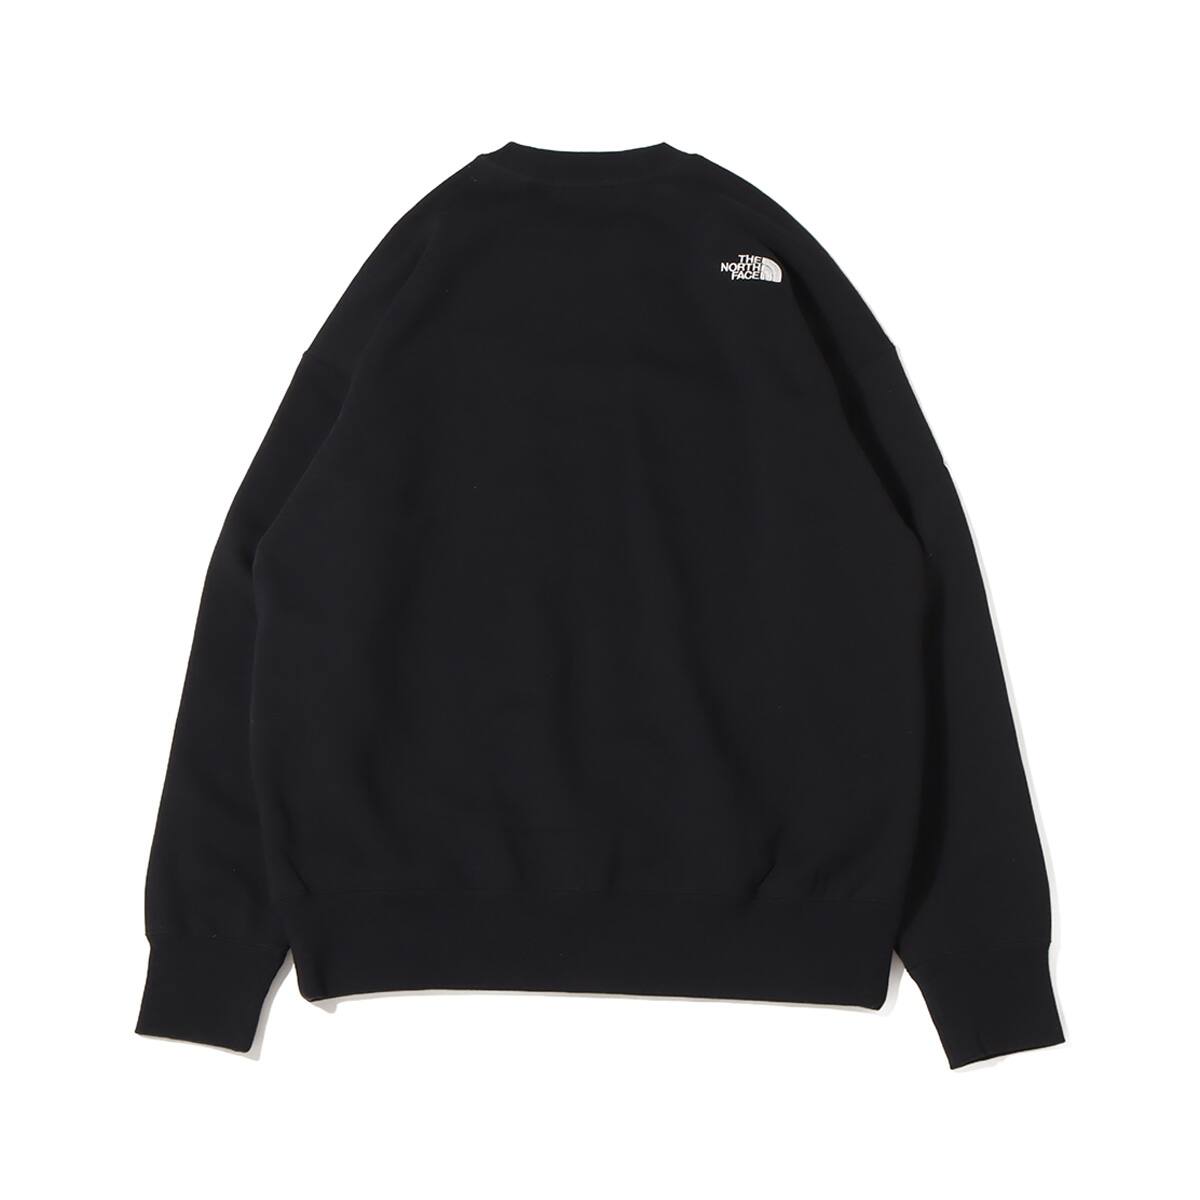 THE NORTH FACE NEVER STOP ING CREW BLACK ザ・ノース 